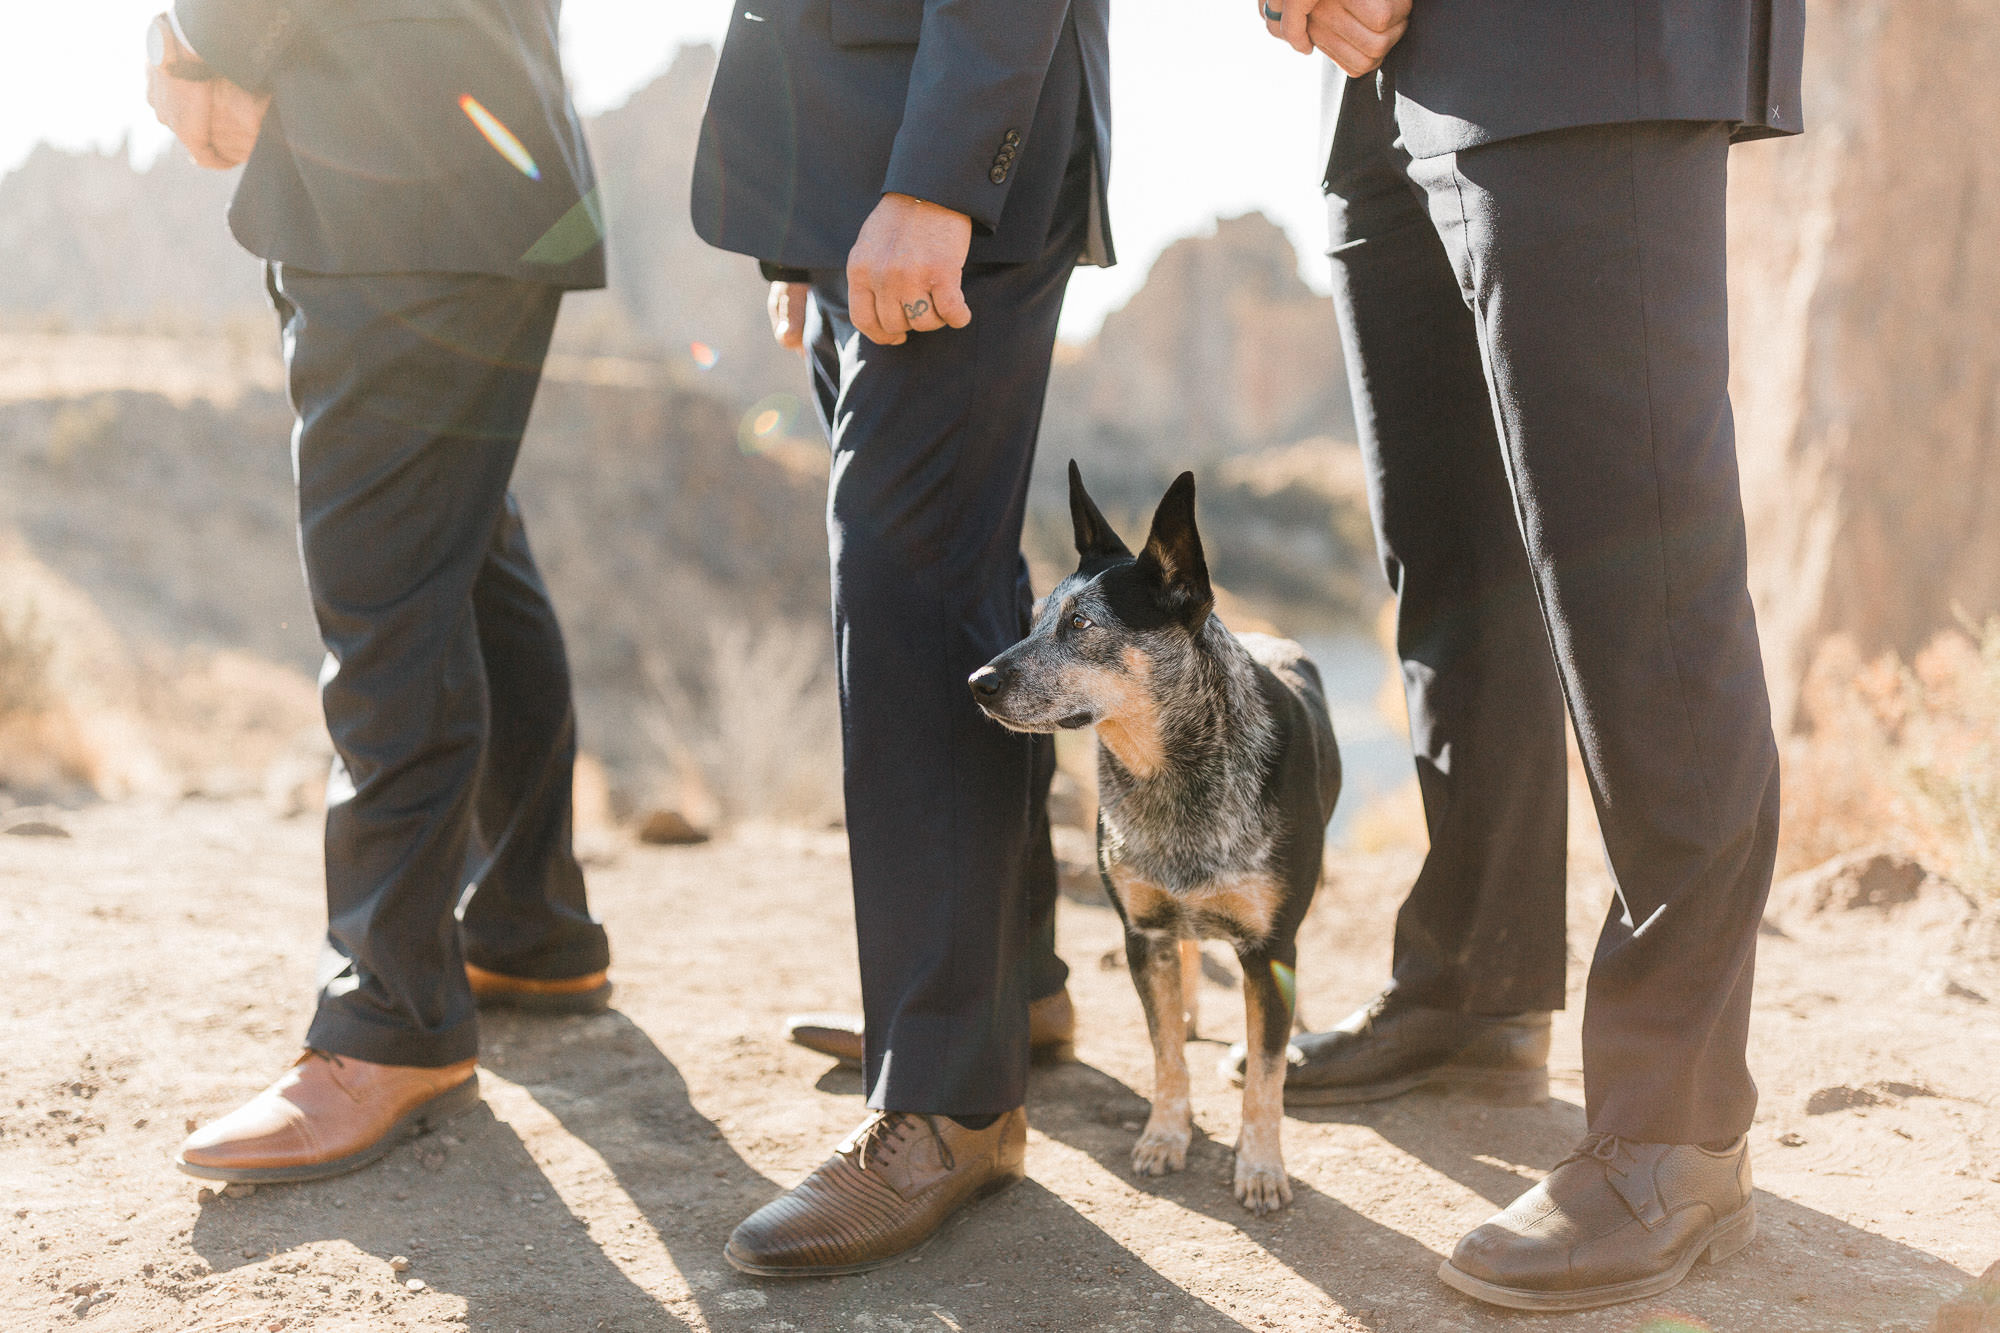 Dog stands among groomsmen during wedding ceremony at Smith Rock State Park